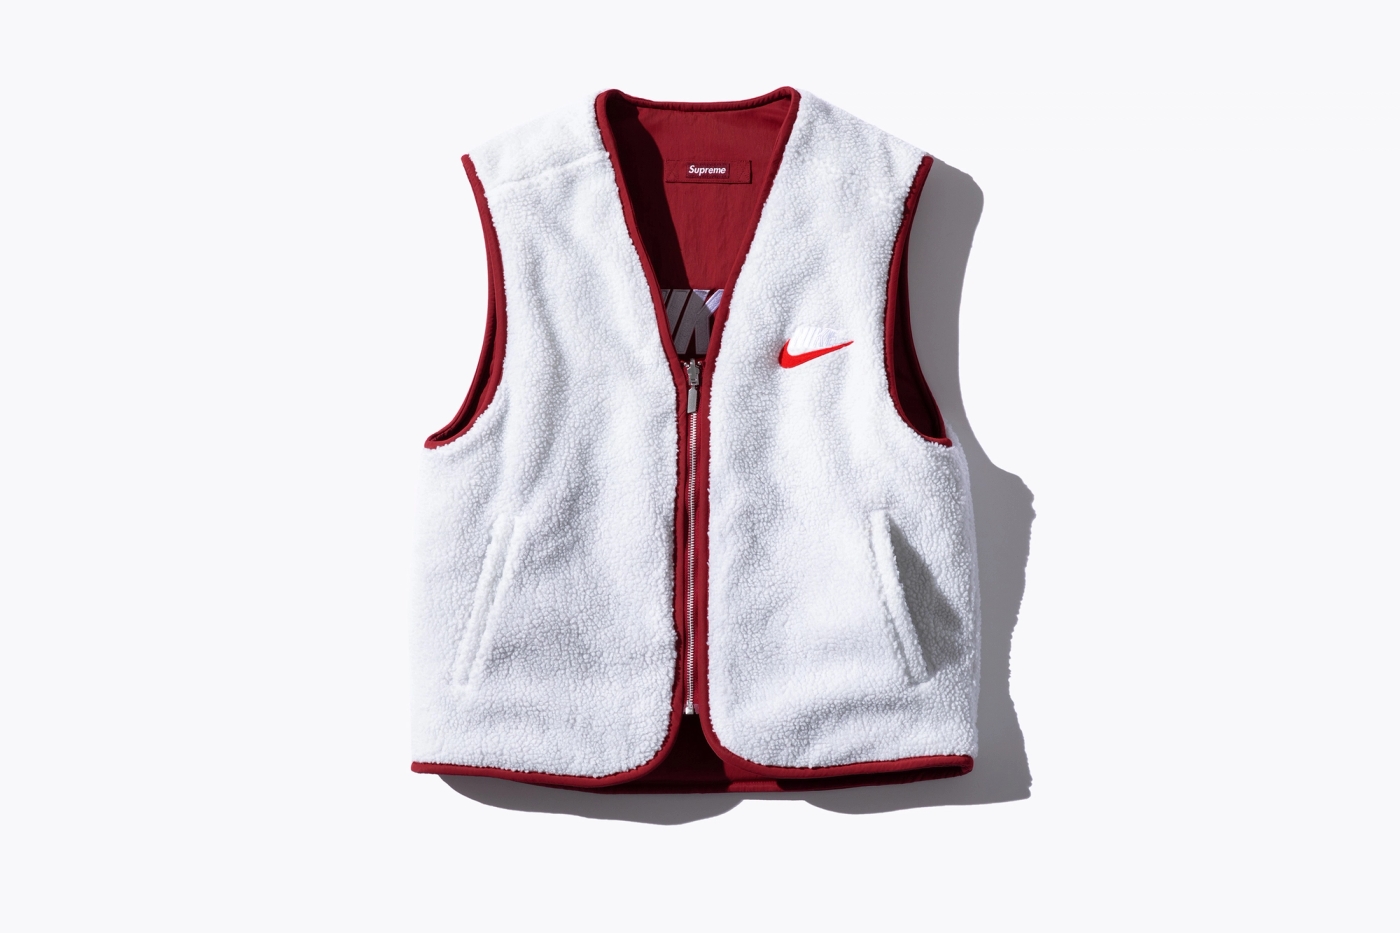 Reversible Nylon Vest with sherpa fleece lining and embroidered logos. (19/38)